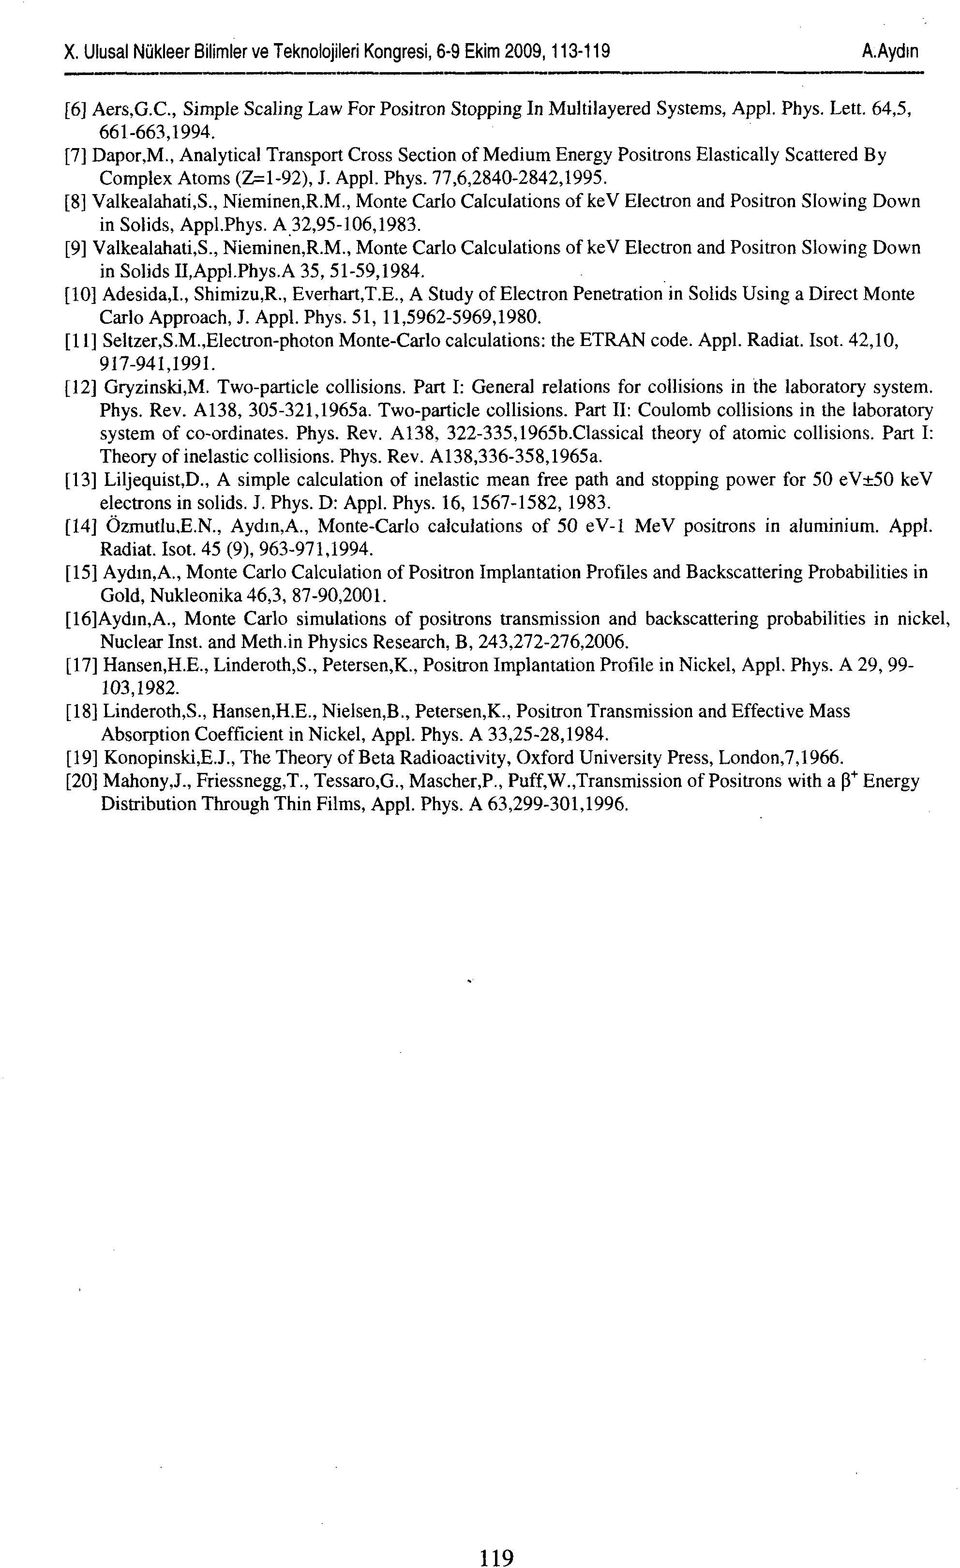 phys. 32,95-106,1983. [9] Valkealahati.S., Nieminen,R.M Monte Carlo Calculations of kev Electron and Positron Slowing Down in Solids II,ppl.Phys. 35, 51-59,1984. [10] desida,i., Shimizu,R., Everhart.